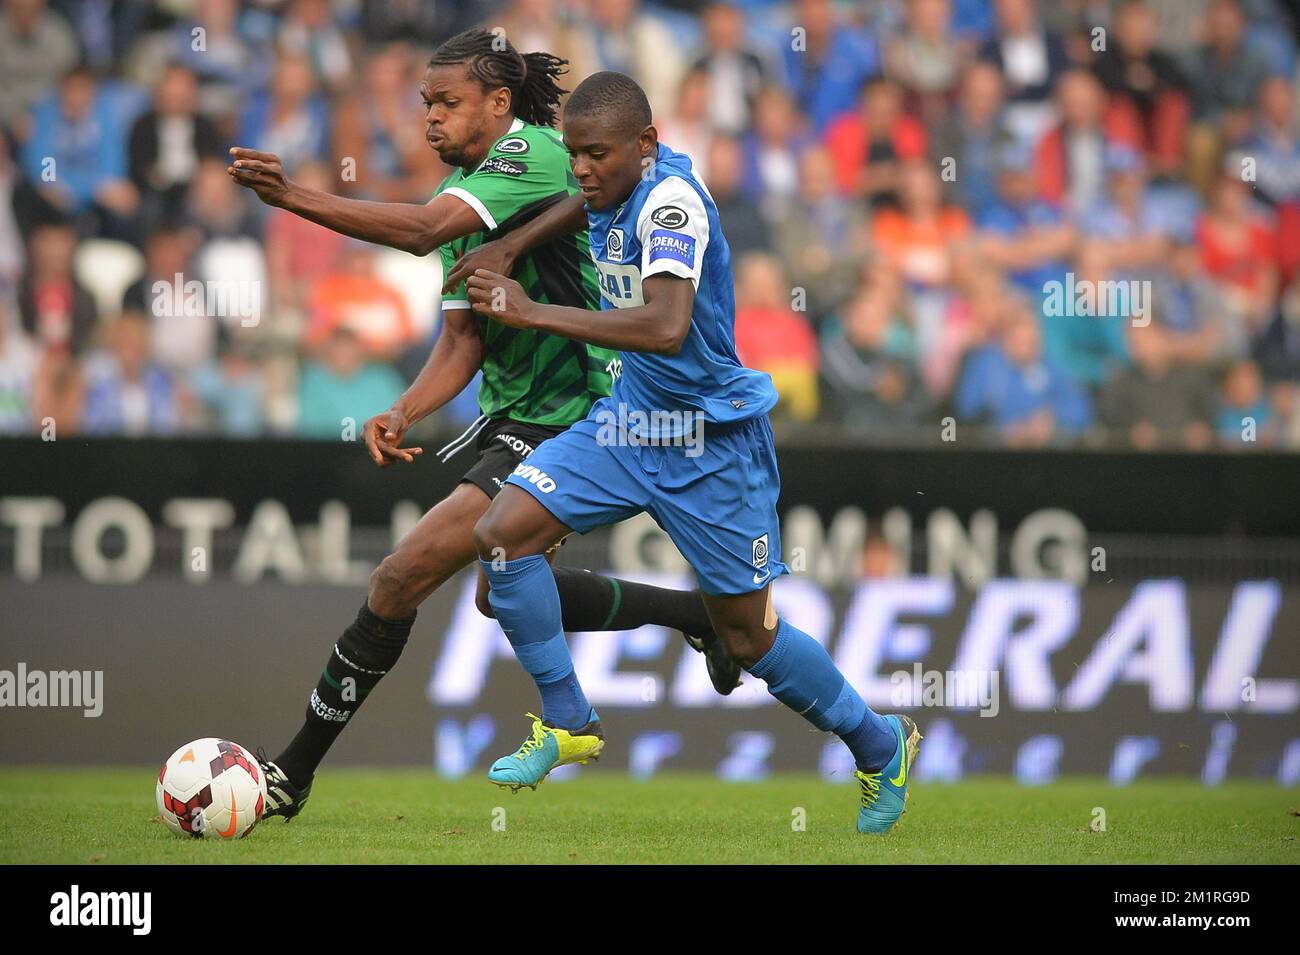 Cercle's Michael Uchebo and Genk's Derrick Tshimanga in action during the Jupiler Pro League match between KRC Genk and Cercle Brugge KSV, in Genk, Sunday 25 August 2013, on day 5 of the Belgian soccer championship.  Stock Photo